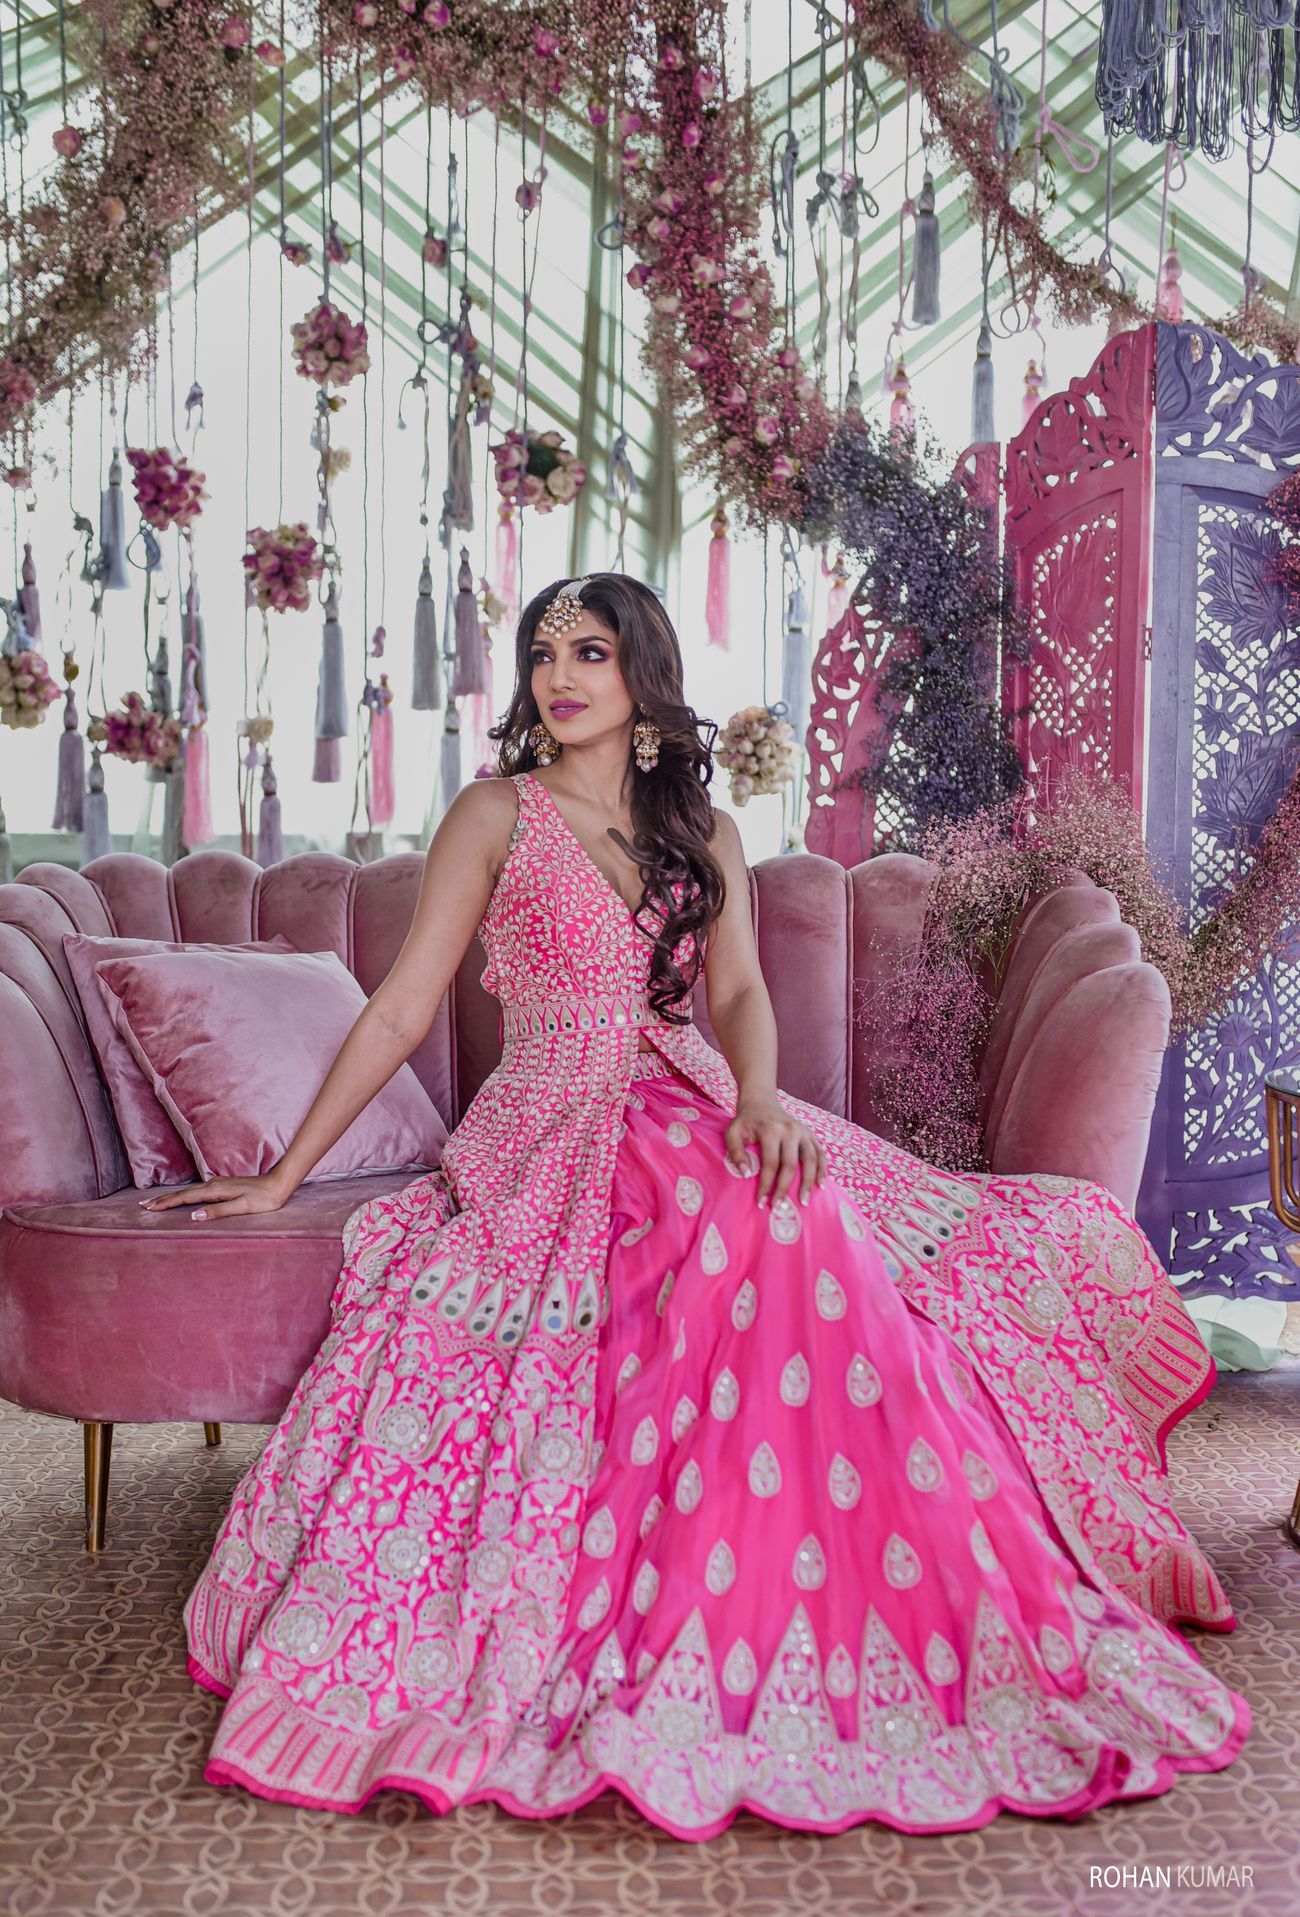 13 Shades Of Pink That Will Turn Every Bride Into A Barbie